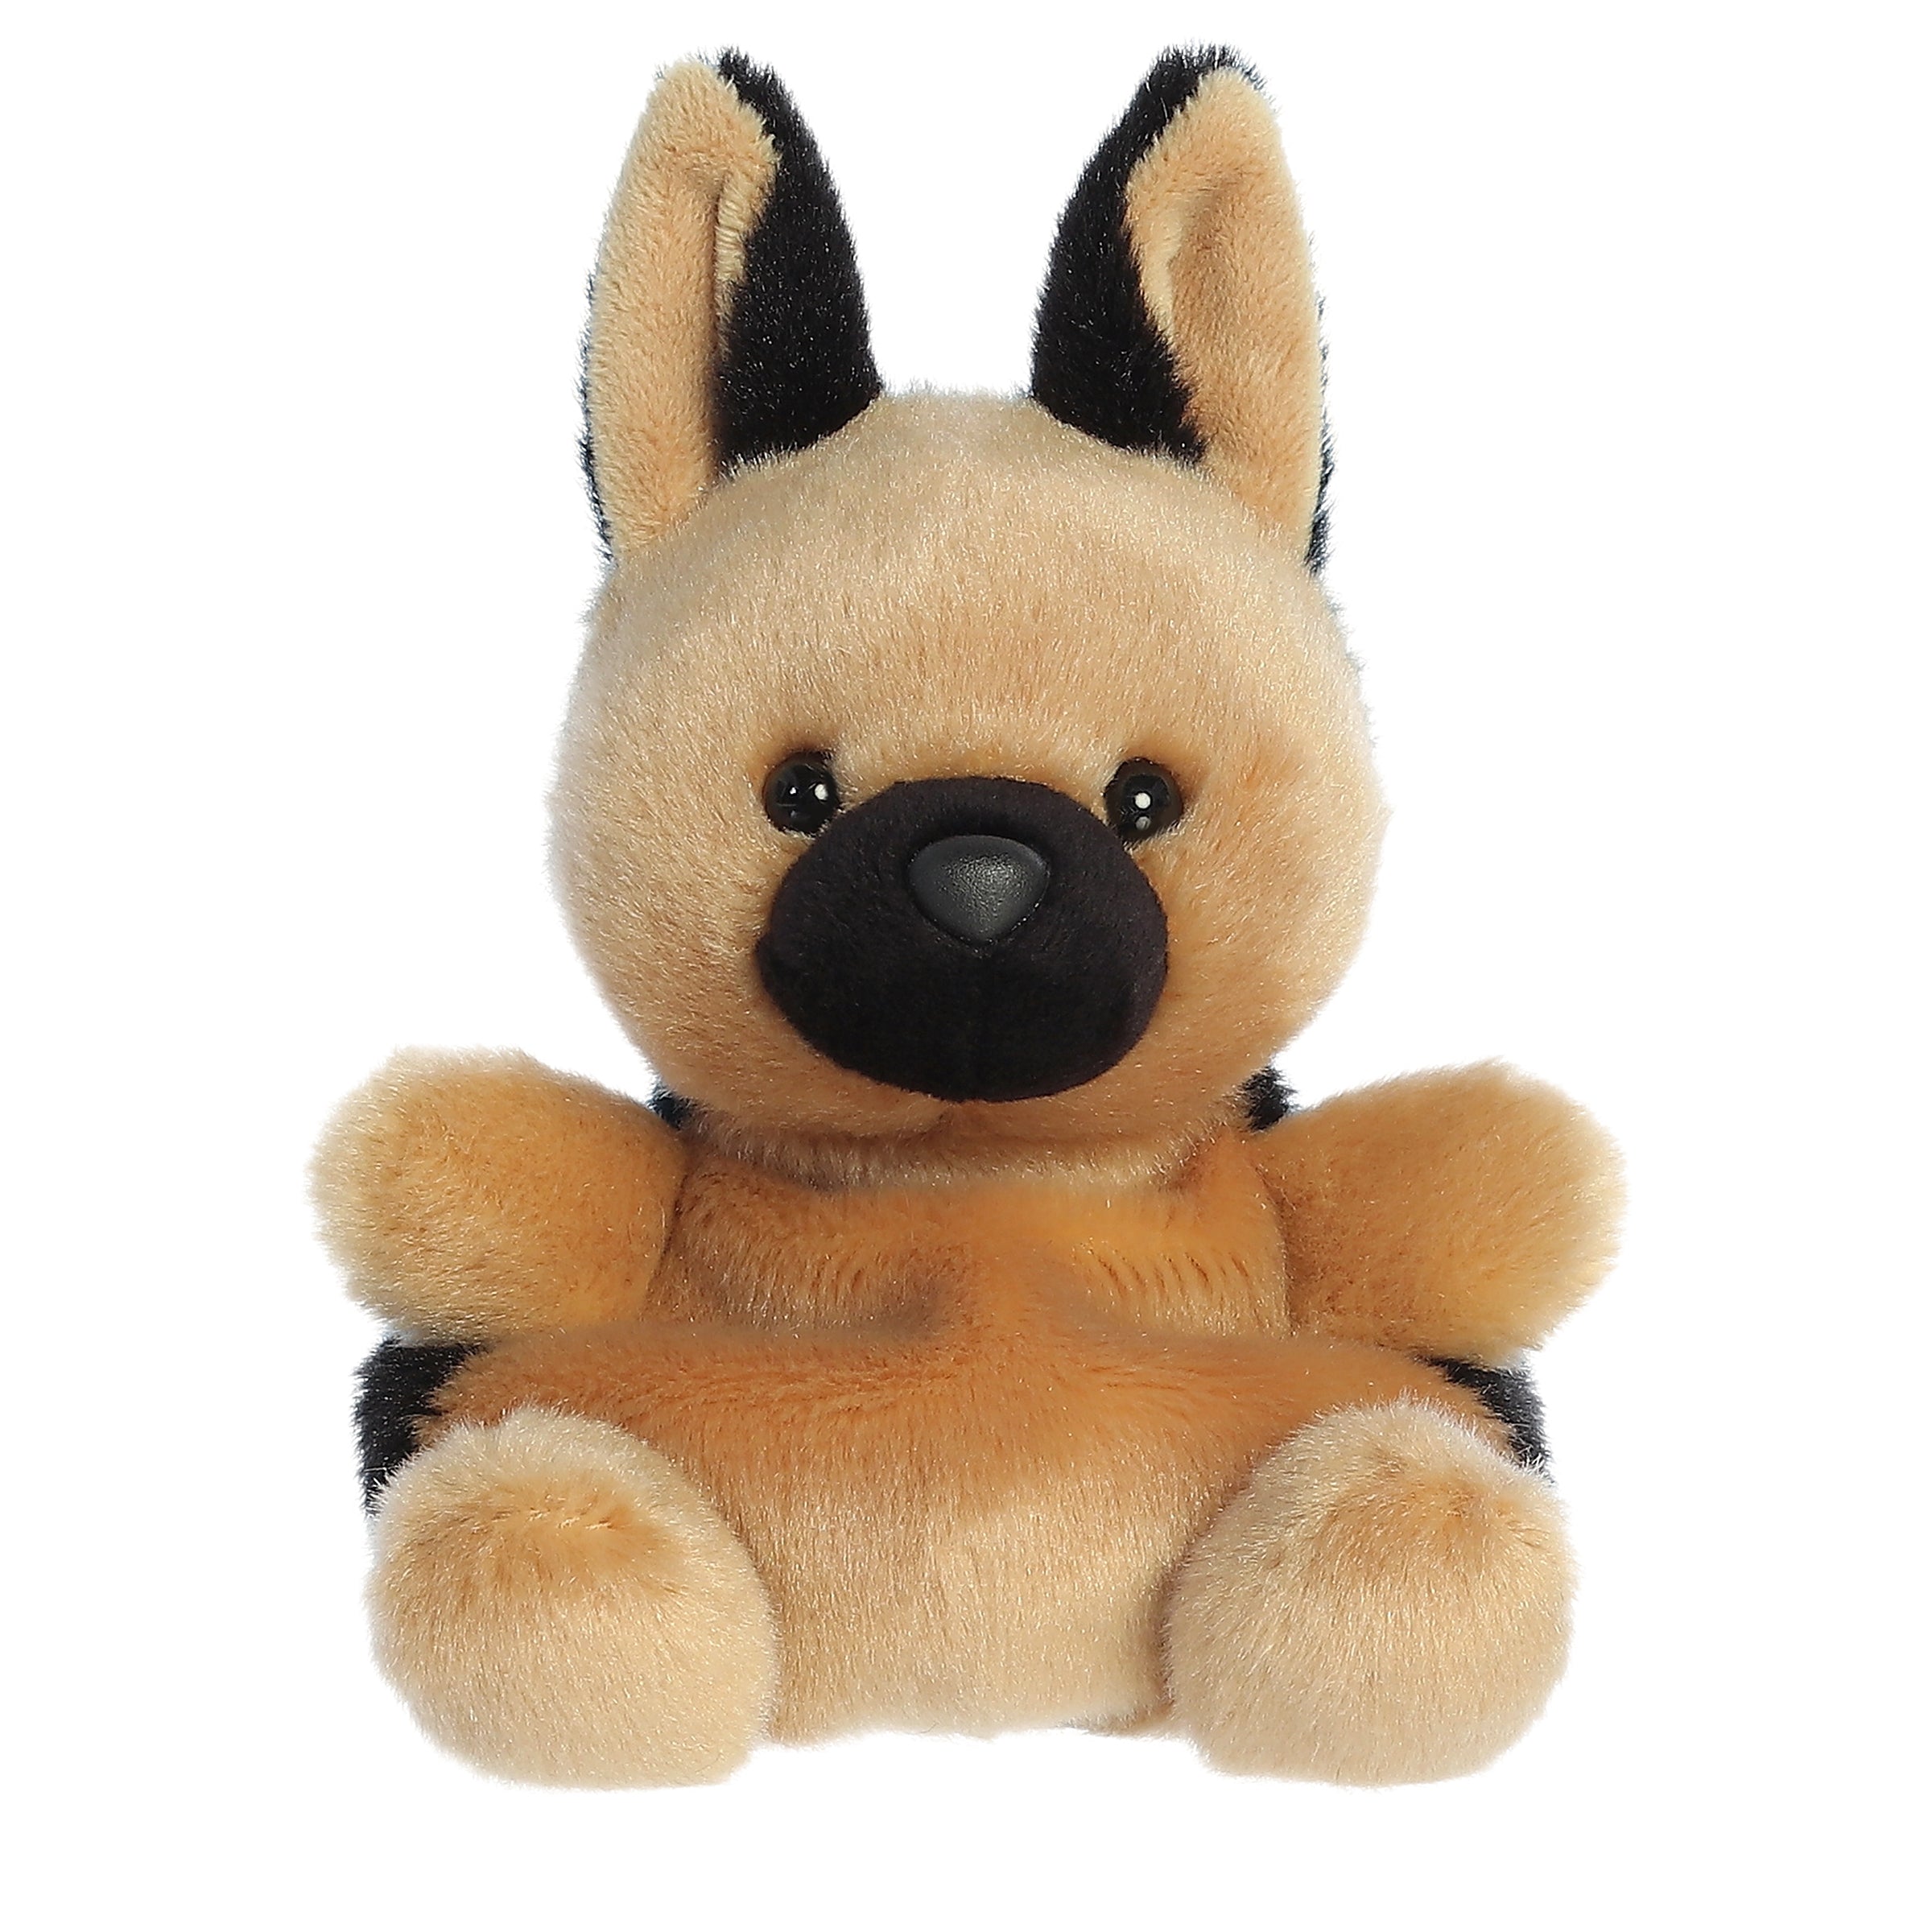 Hans German Shepherd plush from Palm Pals, with golden-brown fur and kind eyes, offers comfort and guardianship.